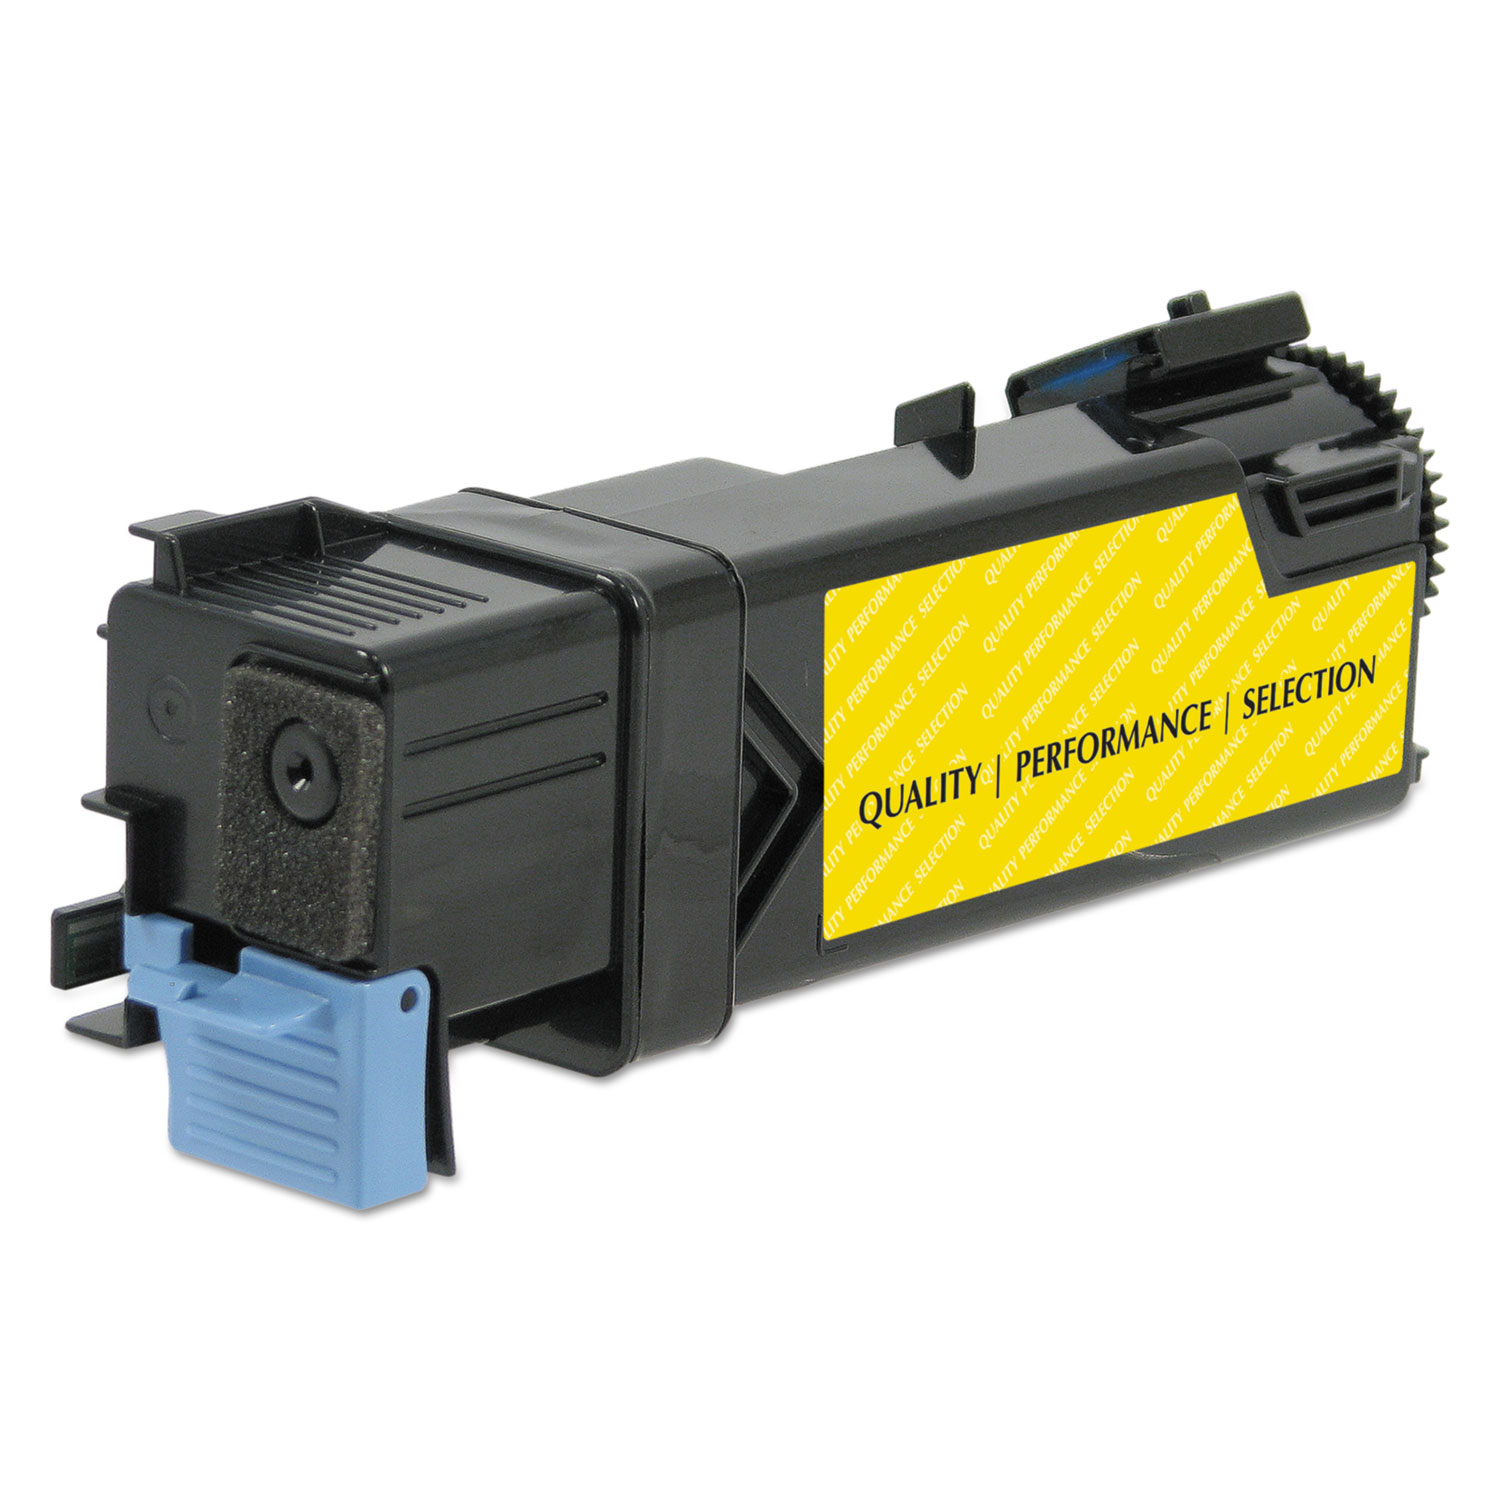 Remanufactured 331-0718 (2150) High-Yield Toner, 2500 Page-Yield, Yellow